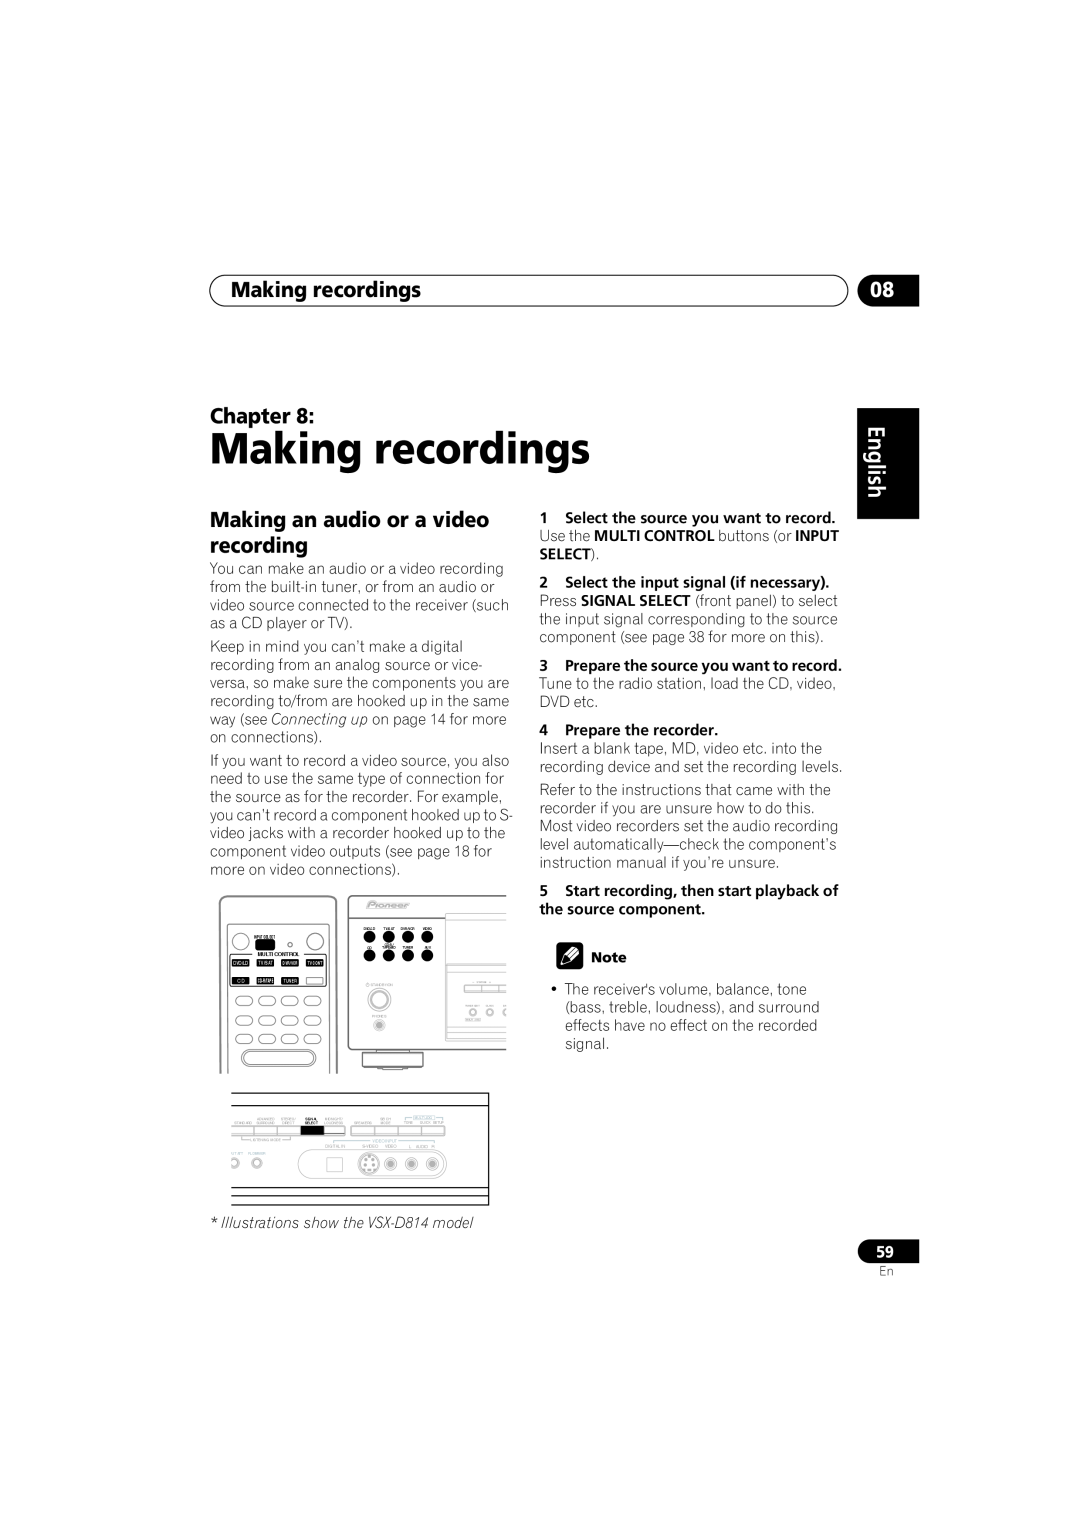 Pioneer VSX-D714, VSX-D514 manual Making recordings Chapter, English, Making an audio or a video recording 